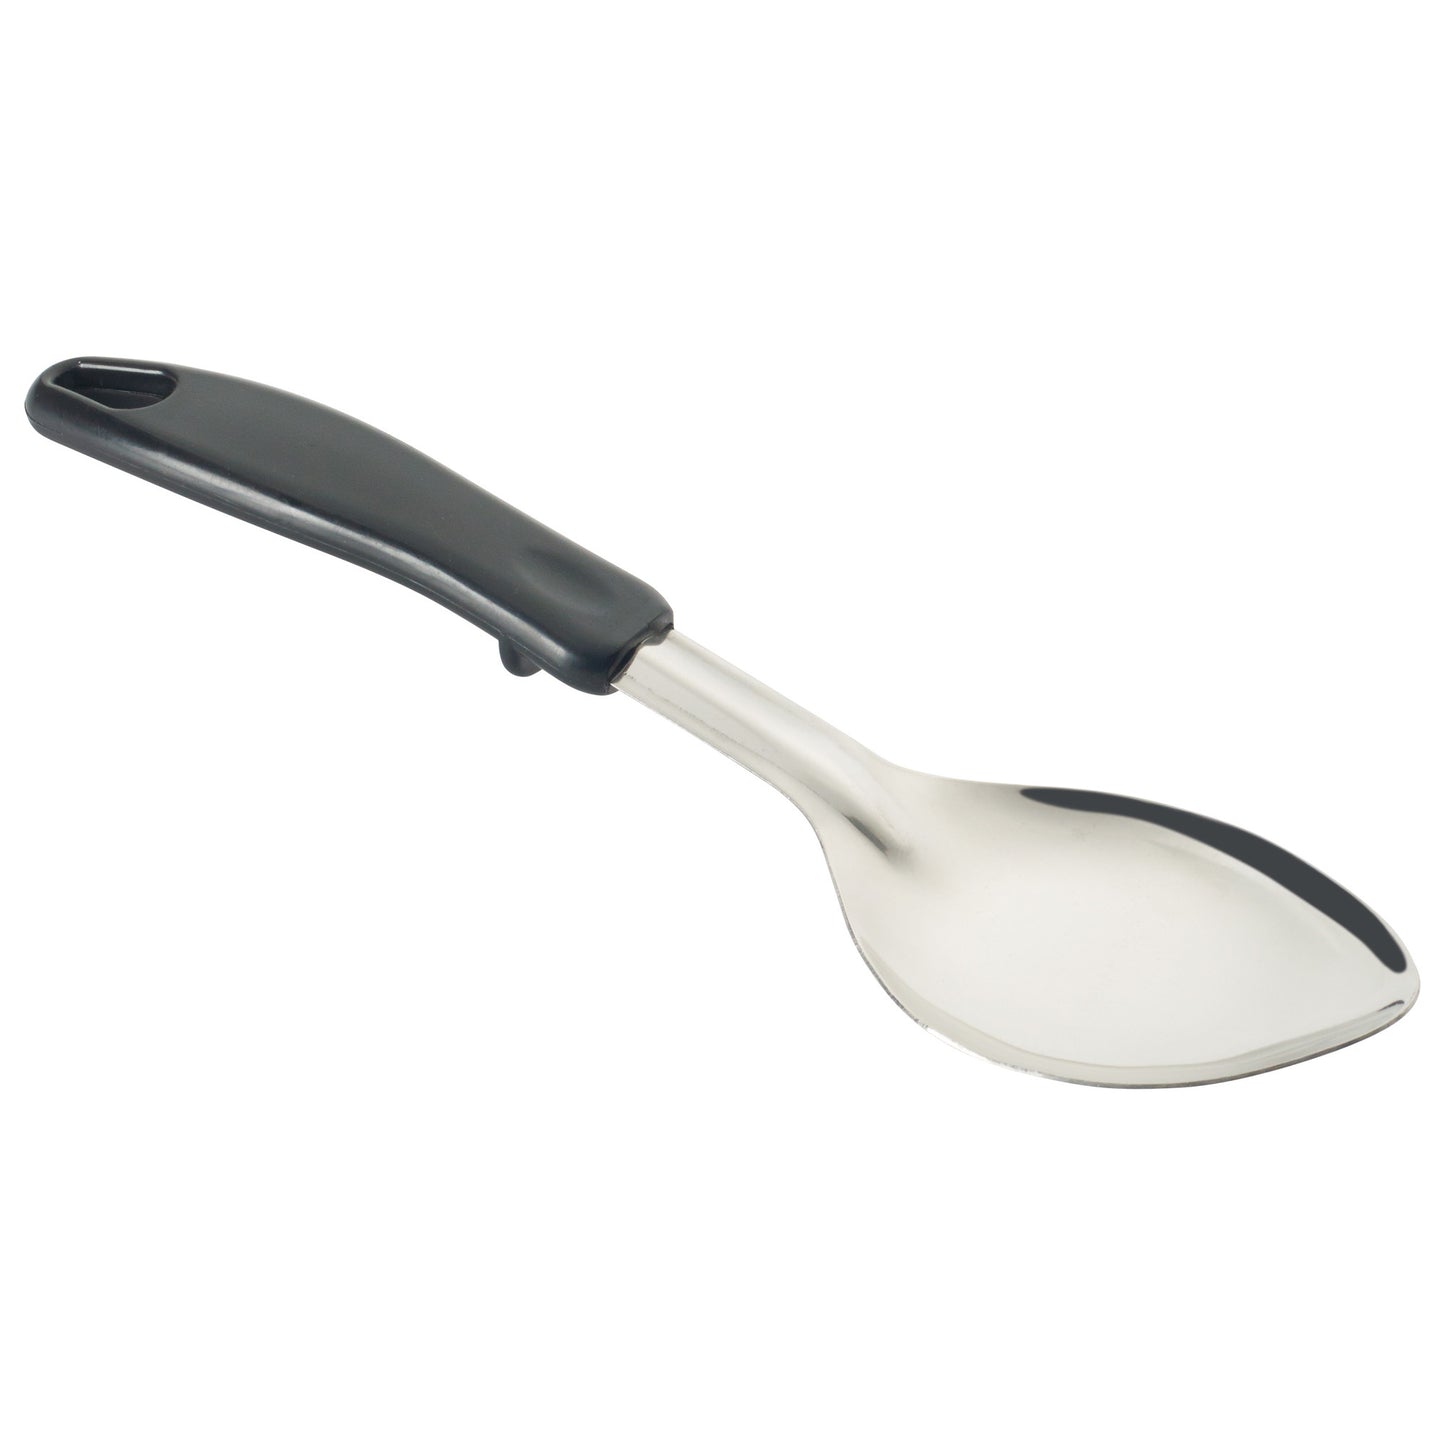 BHOP-11 - Basting Spoon with Stop-Hook Polypropylene Handle - Solid, 11"